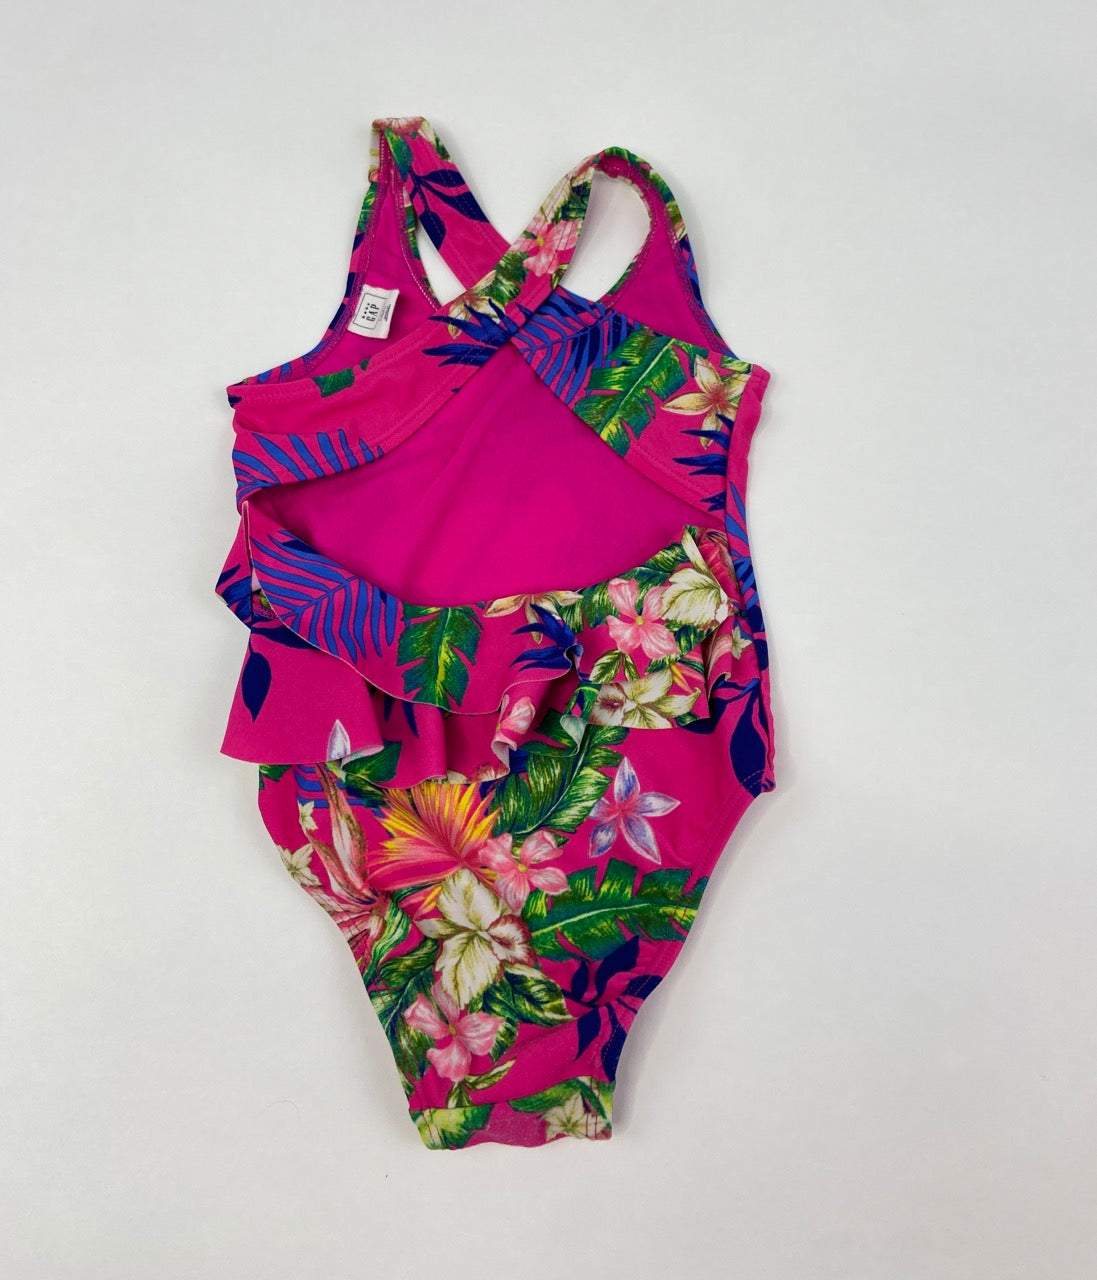 Baby Gap, Hot Pink Tropical Swimsuit- 3T